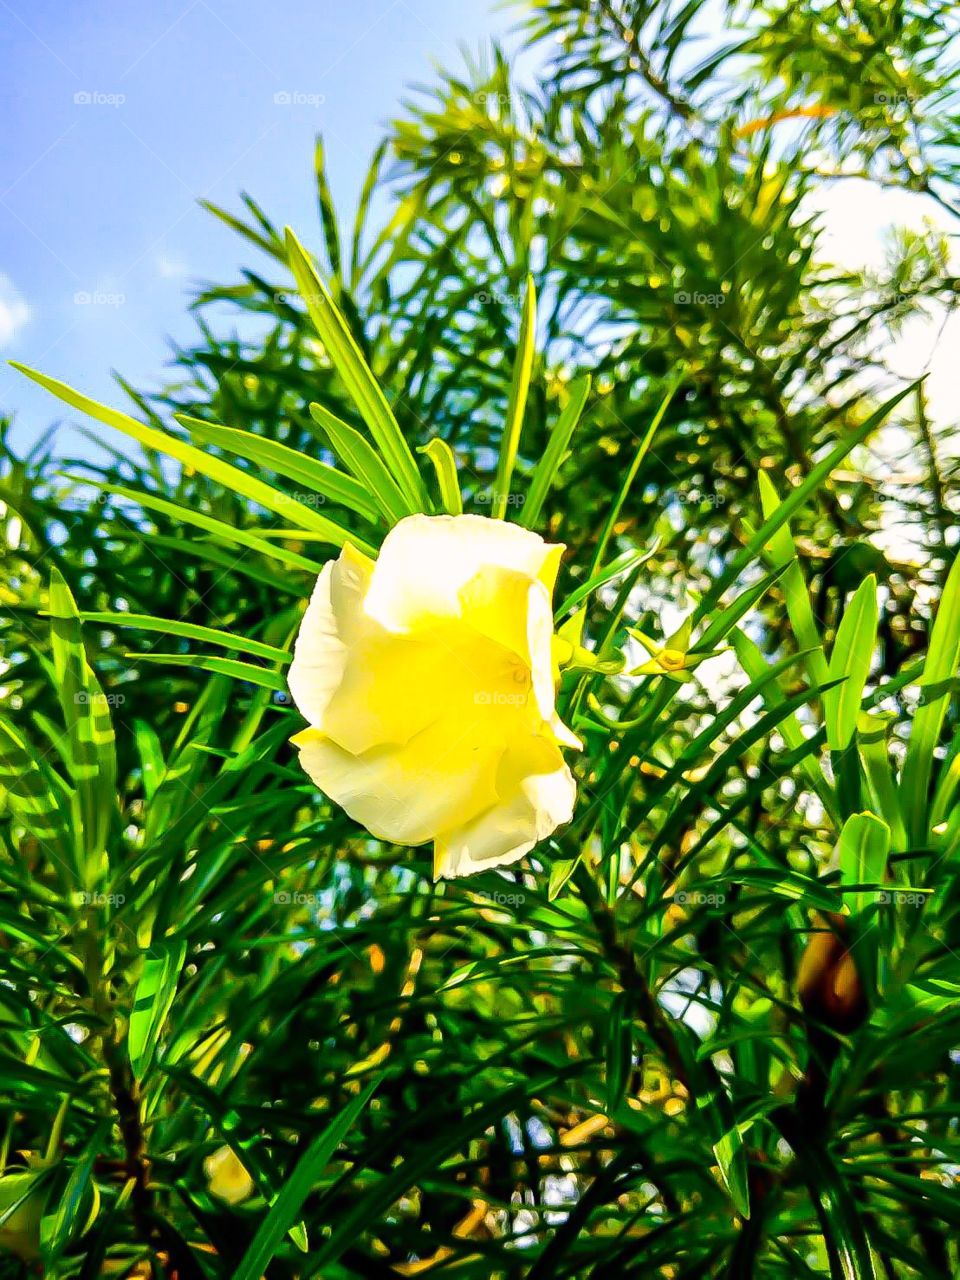 flower in the hot day.